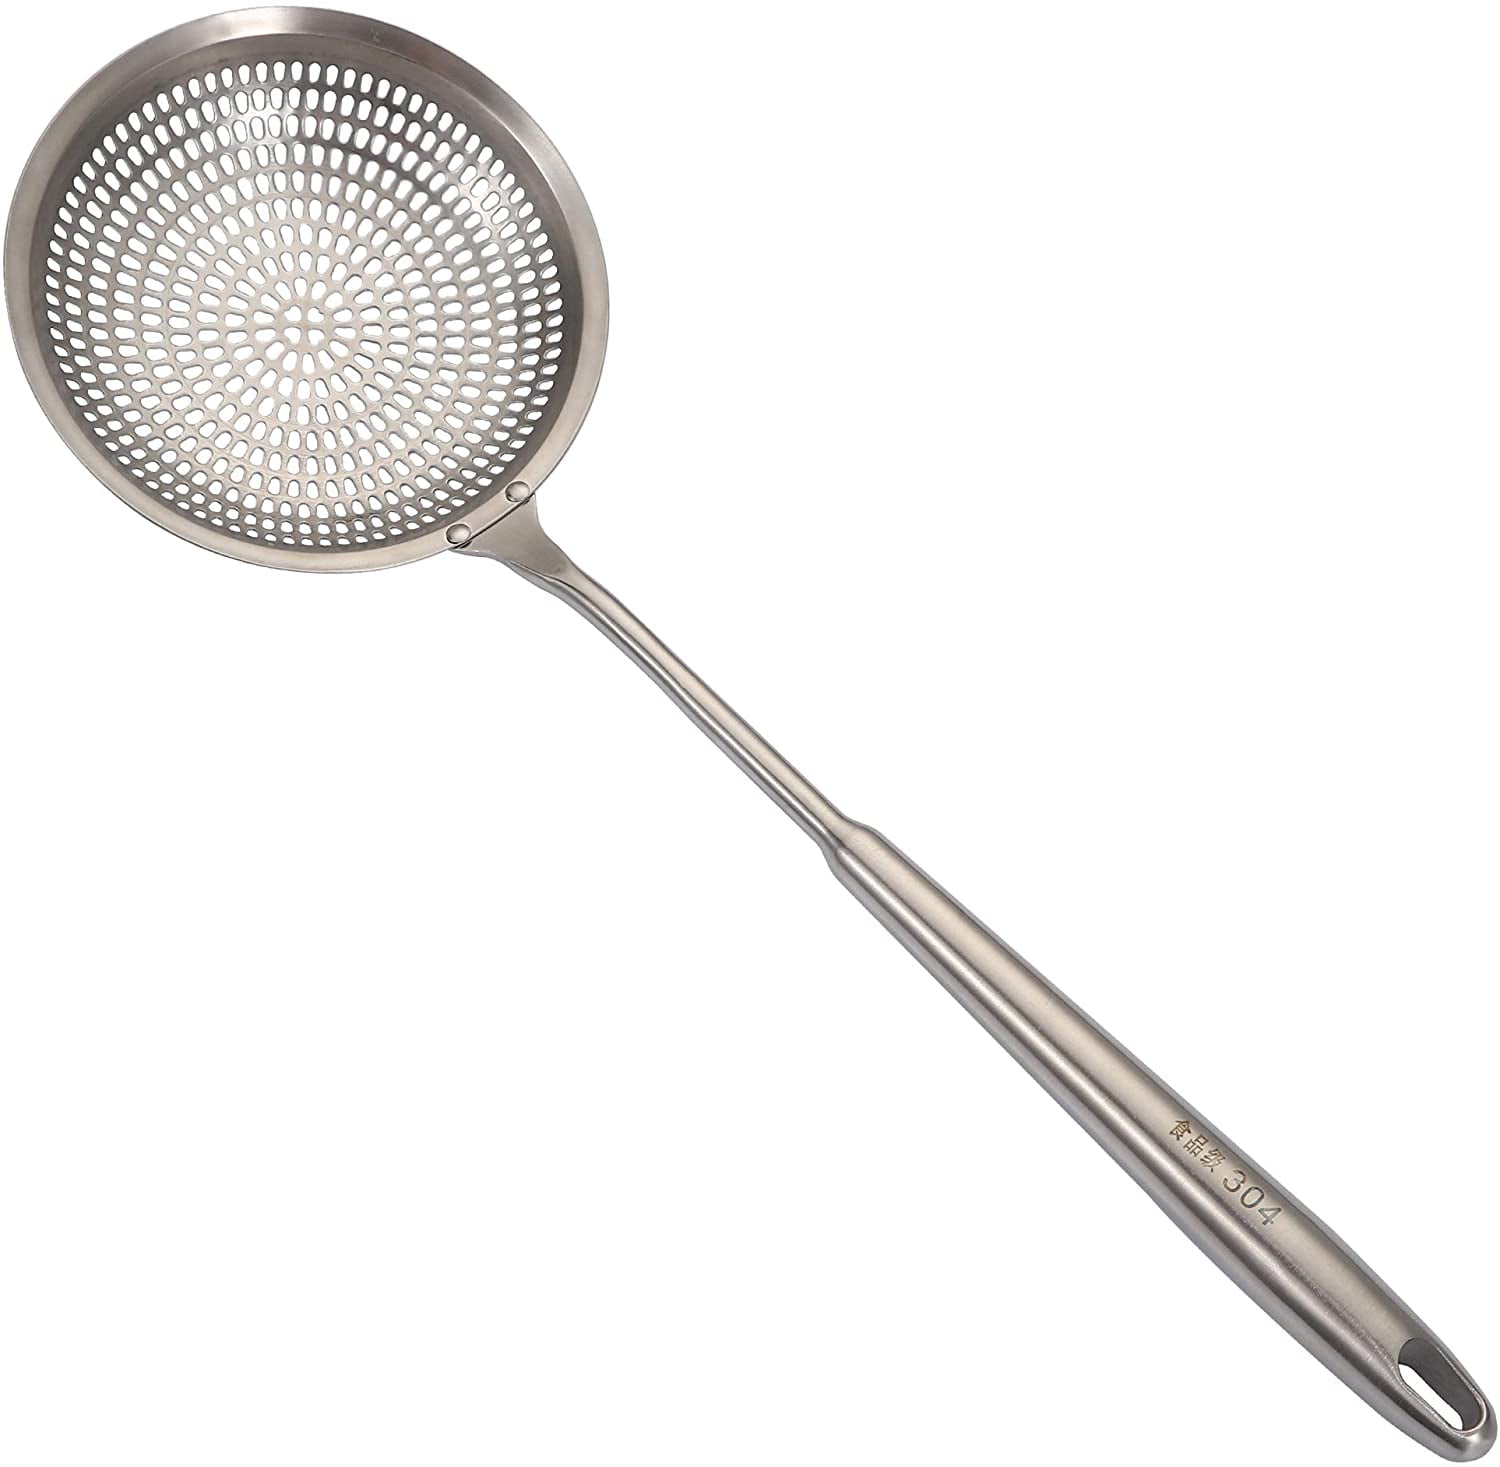 Slotted Spoon,304 Stainless Steel Skimmer Spoon,Strainer Ladle for Kitchen Cooking 16.9 Inch 